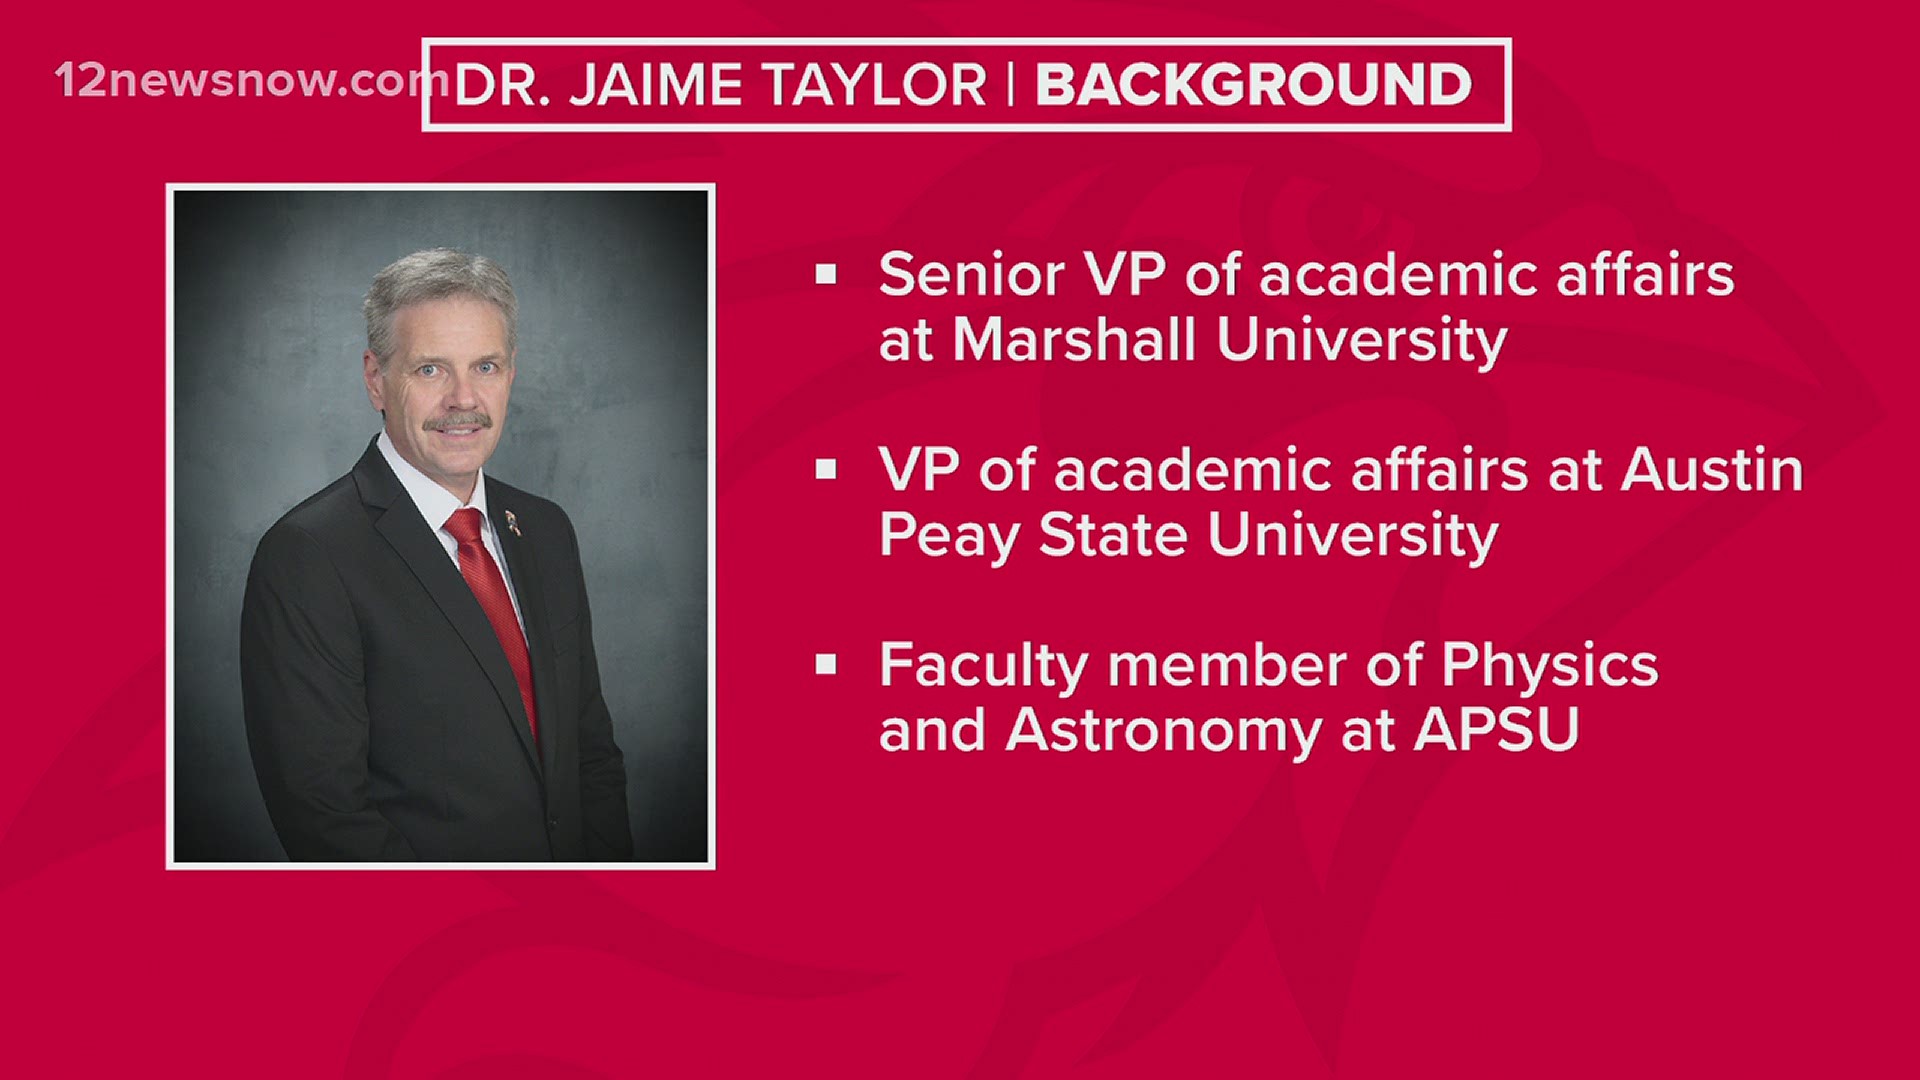 Jaime R. Taylor, Ph.D., will be the 16th president of Lamar University. Taylor was announced as the sole finalist earlier this month.